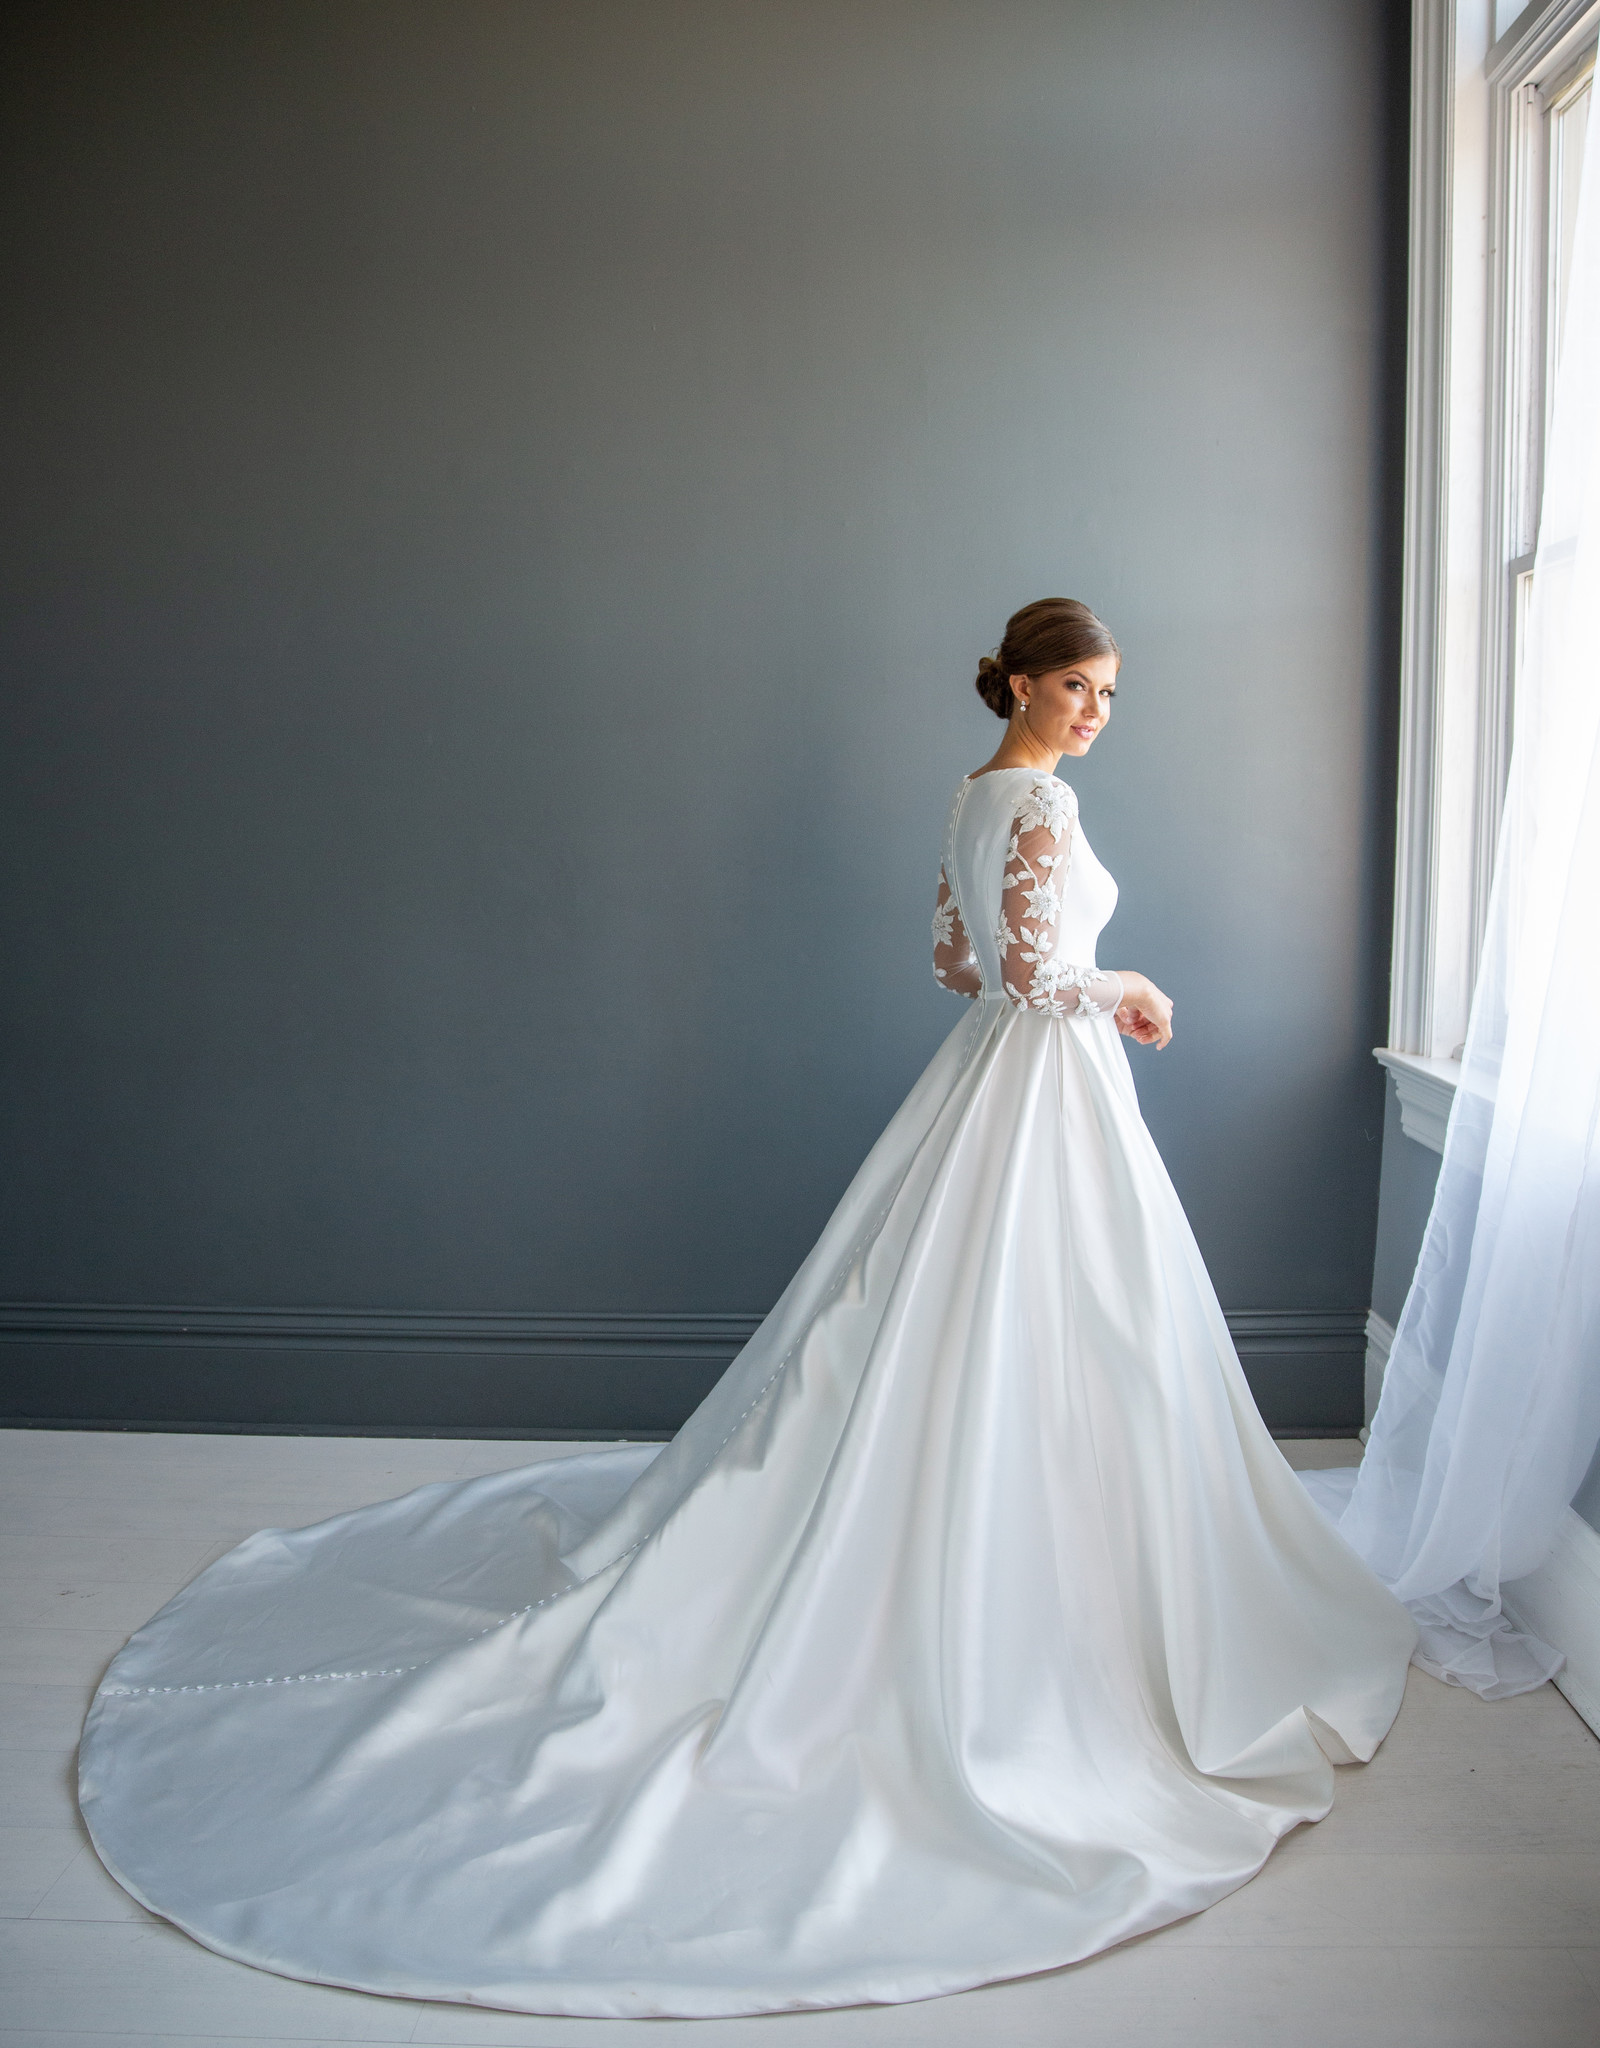 The Modest Bridal Collection Evelyn